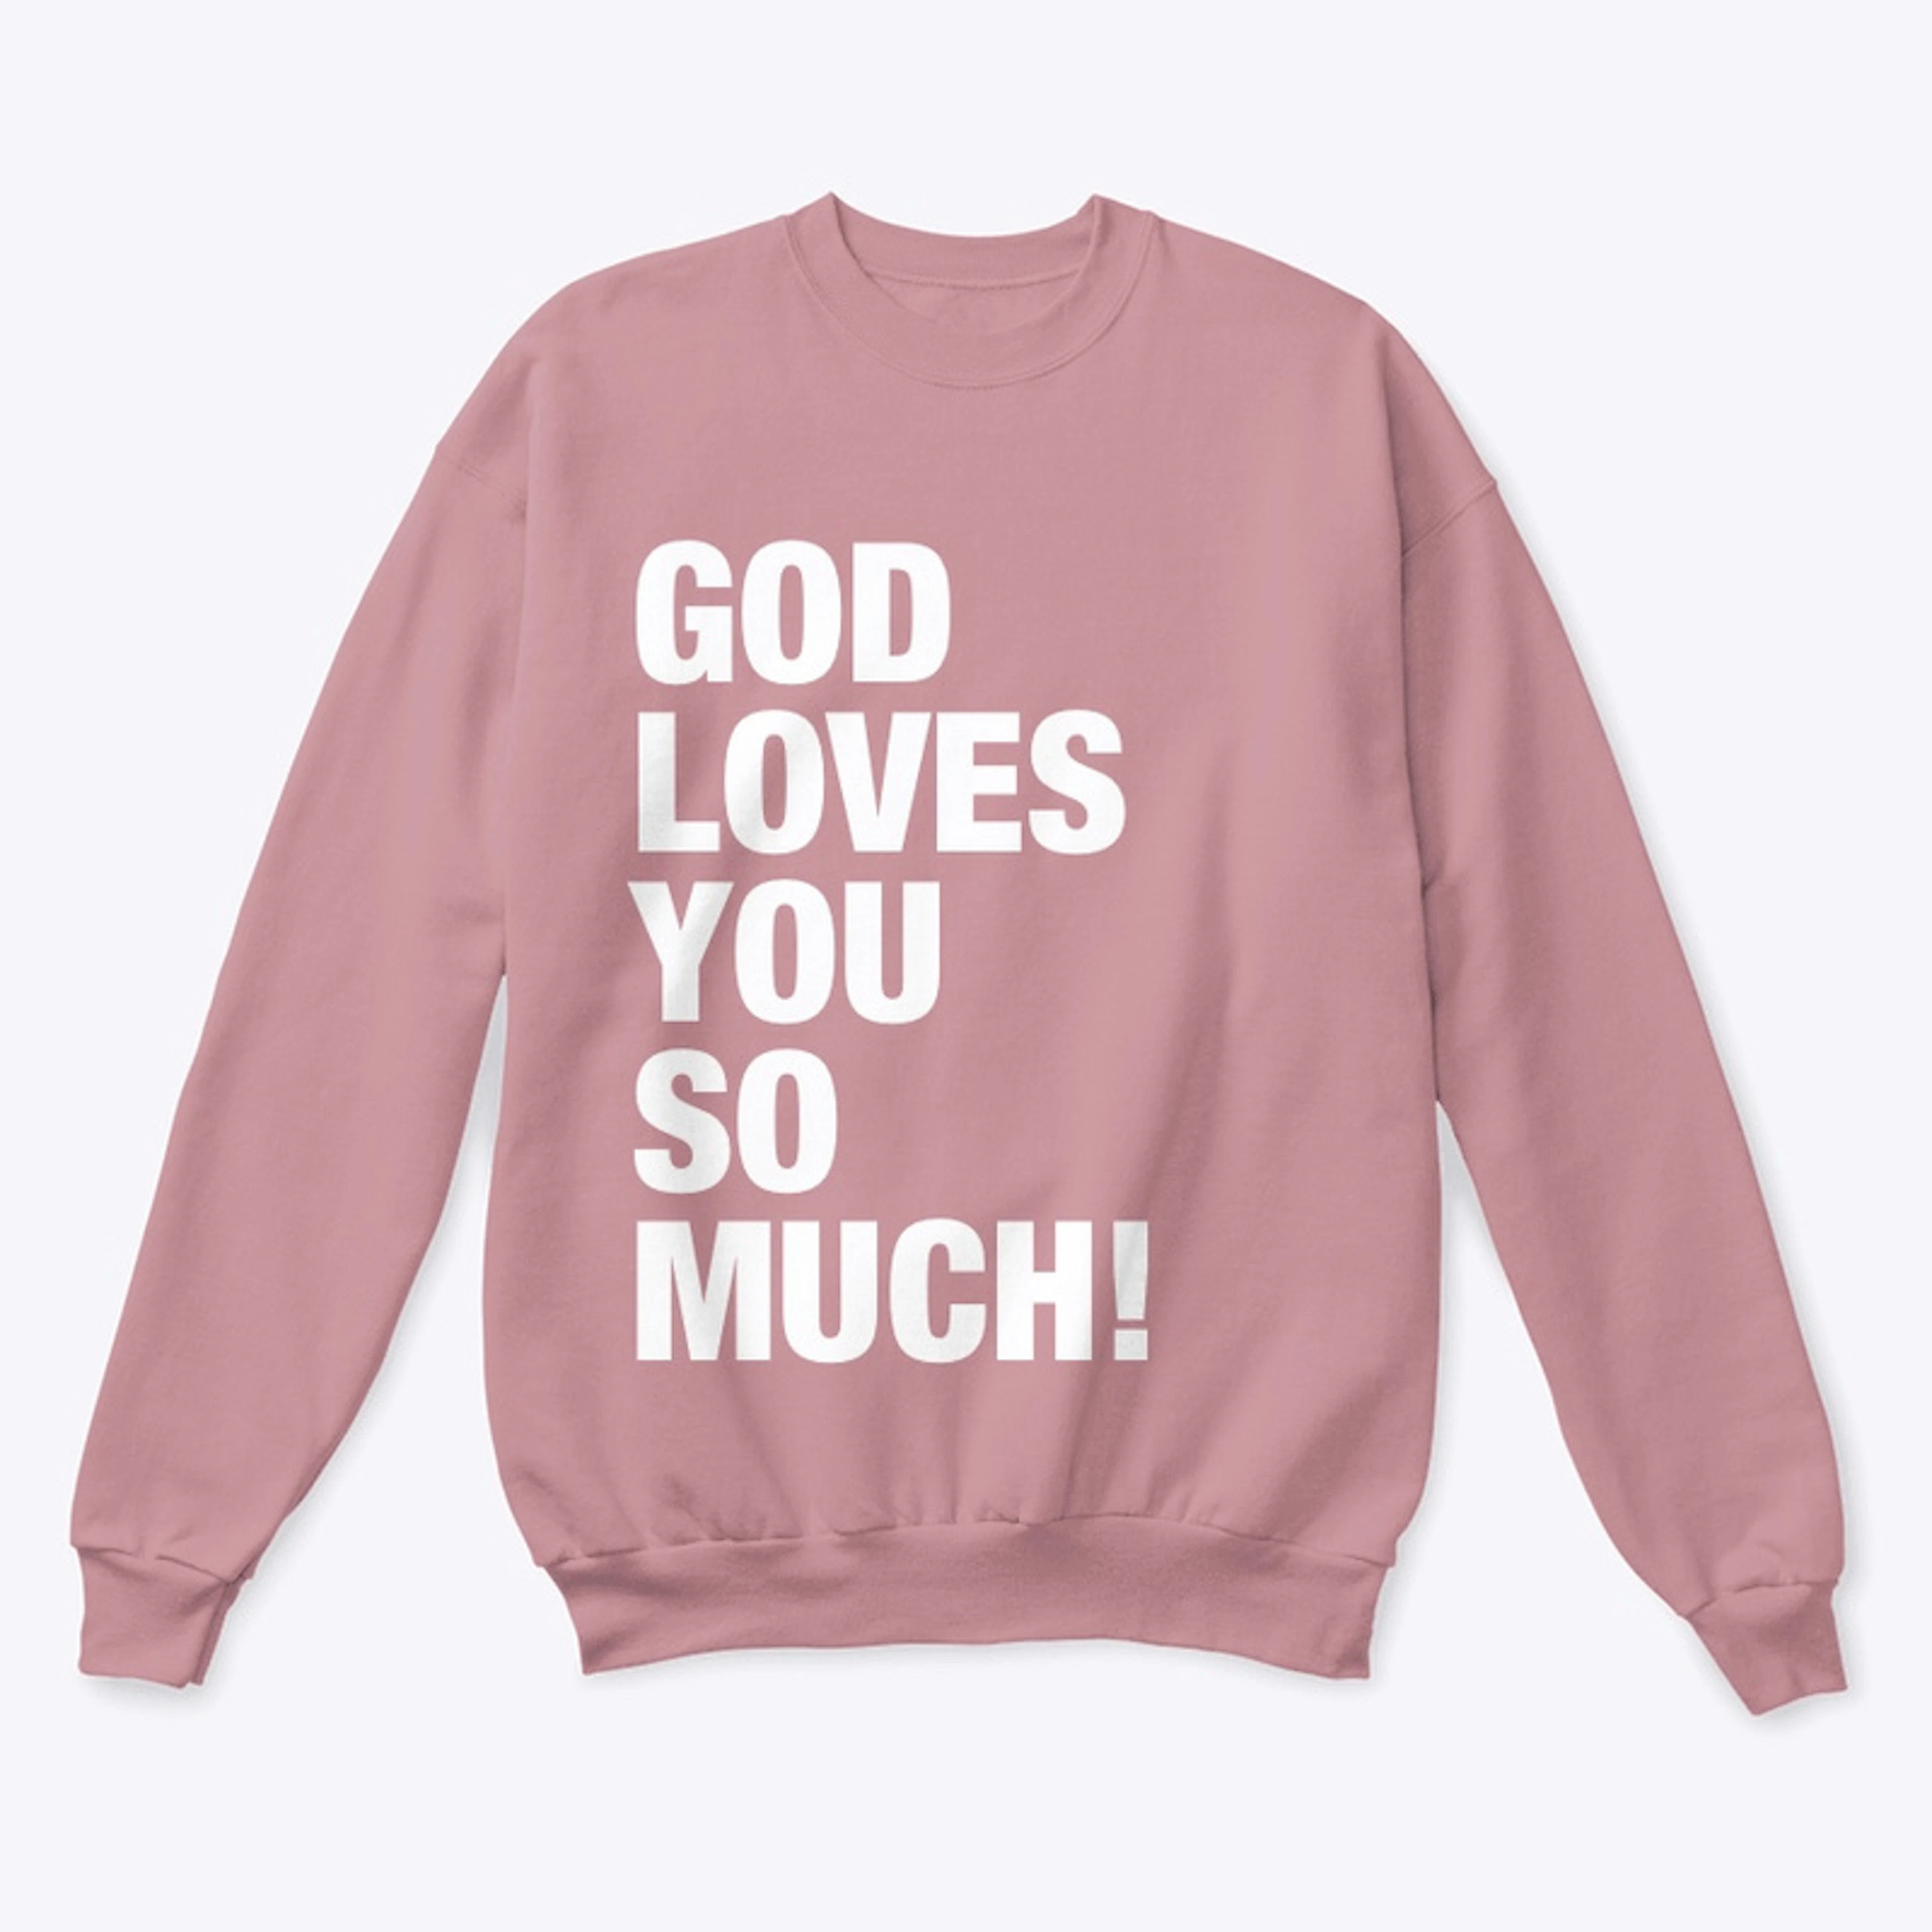 God Loves You So Much!